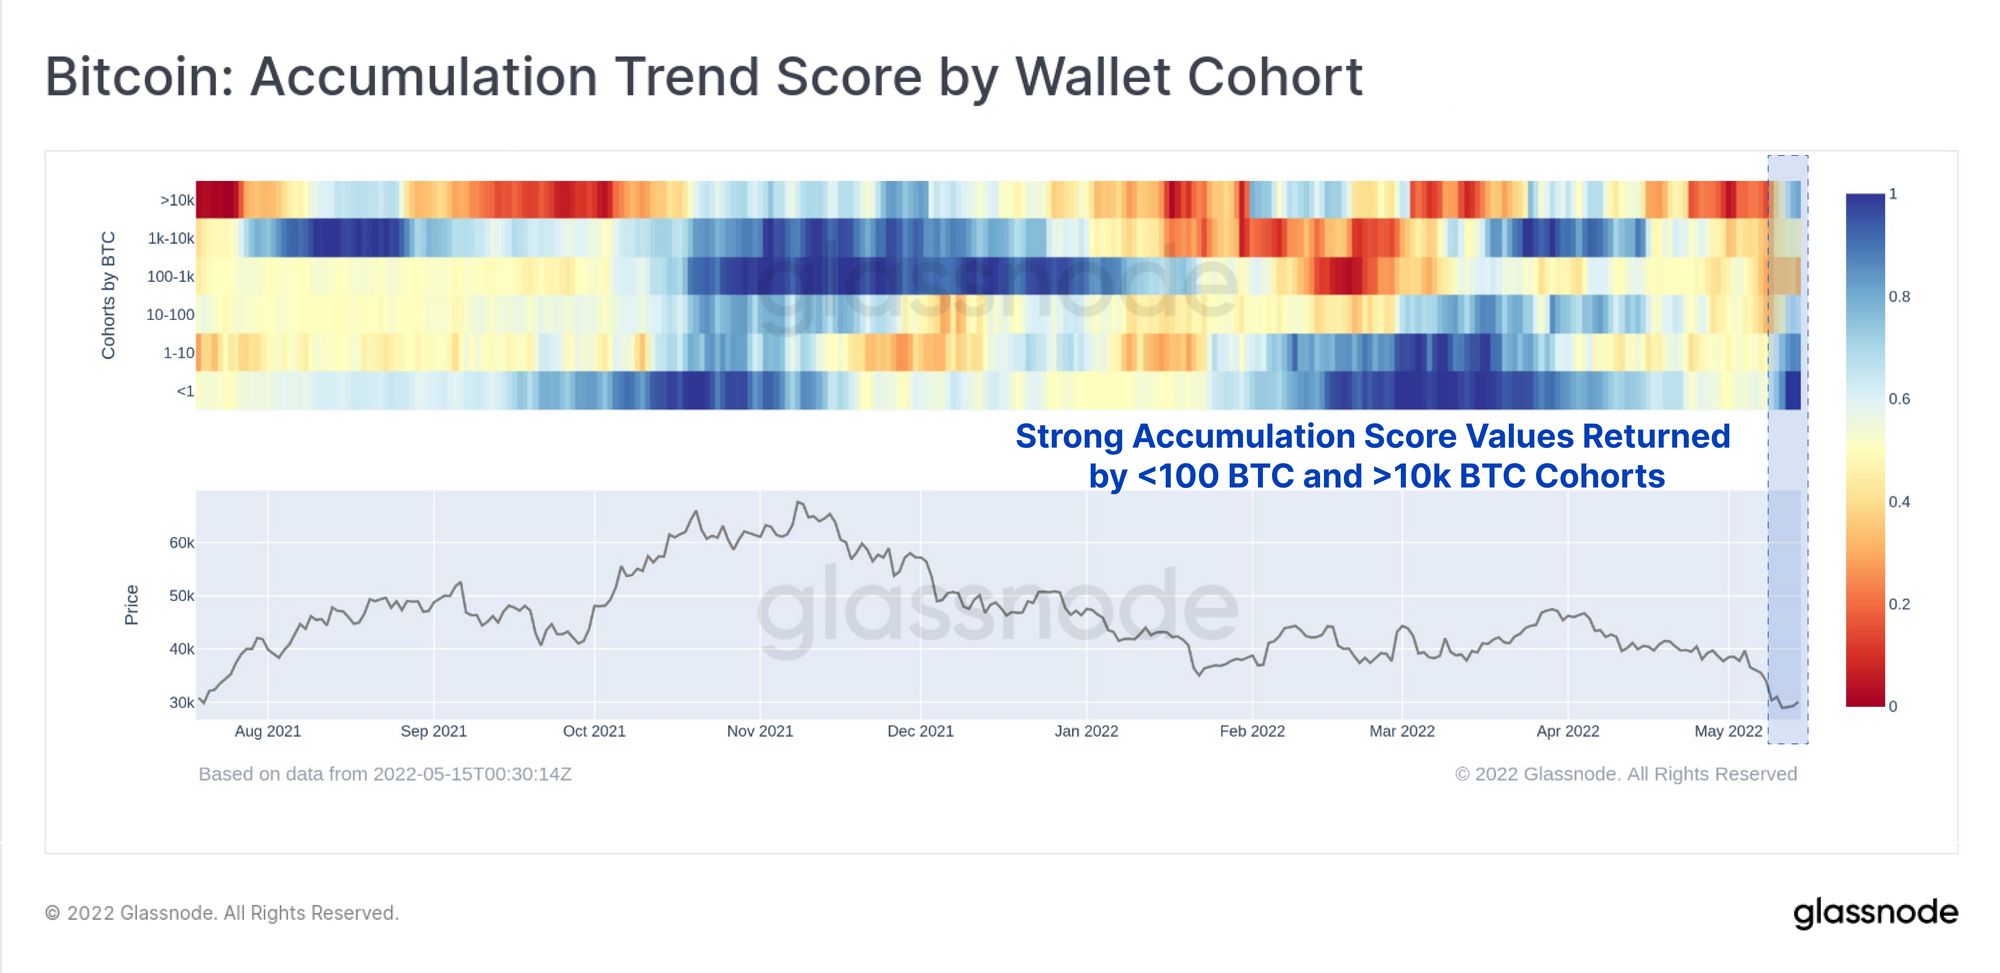 Bitcoin: Accumulation Trend Score by Wallet Cohort